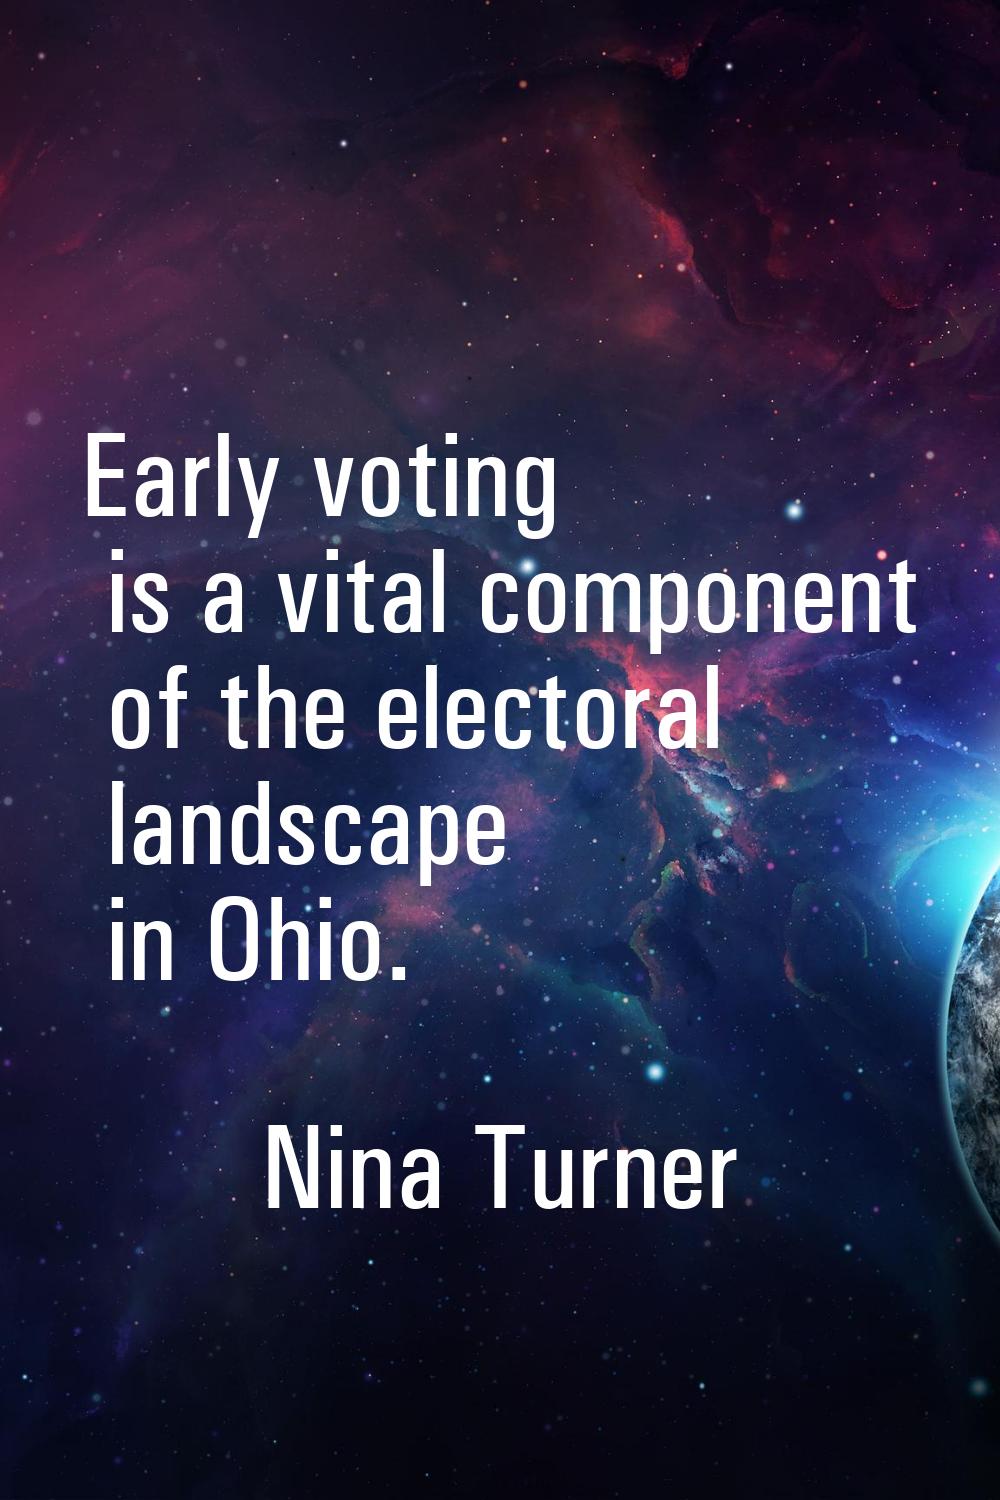 Early voting is a vital component of the electoral landscape in Ohio.